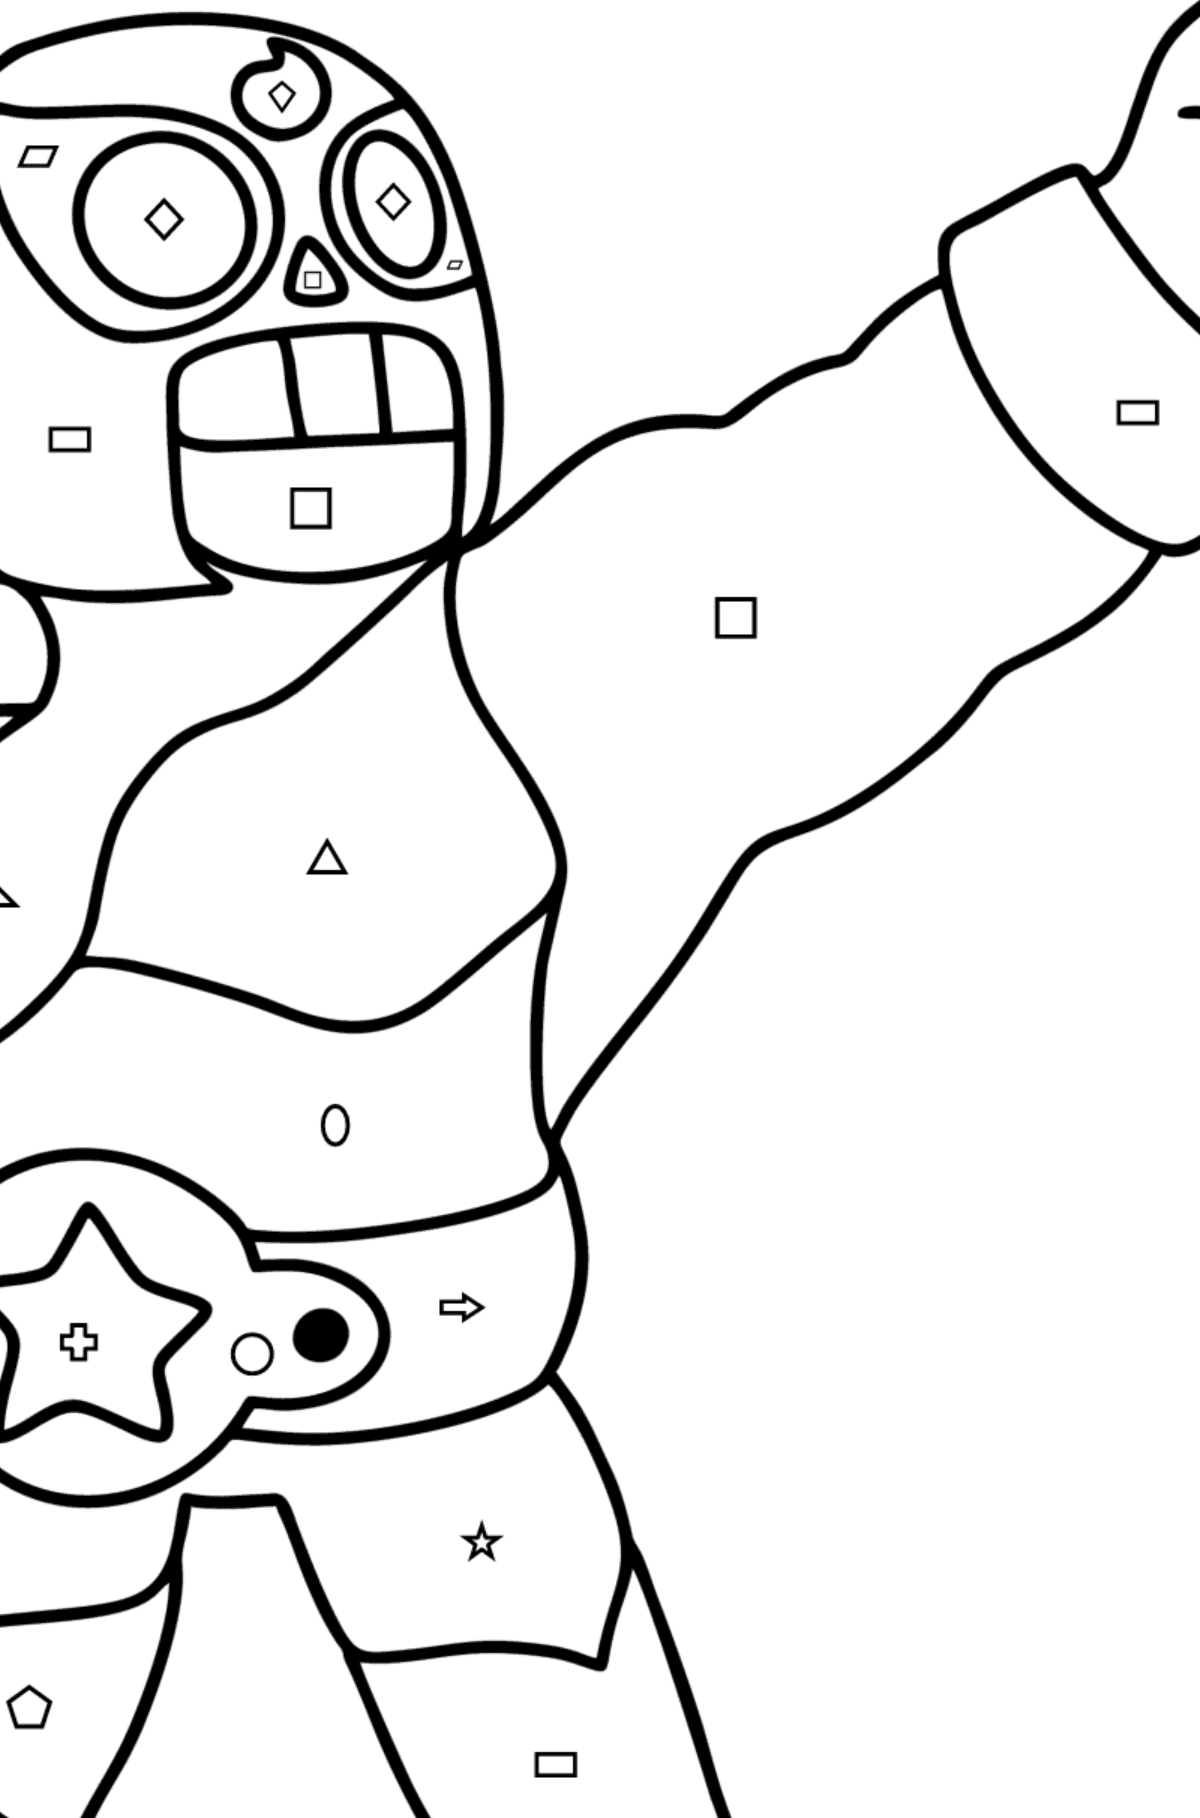 Brawl Stars El Primo coloring page - Coloring by Geometric Shapes for Kids